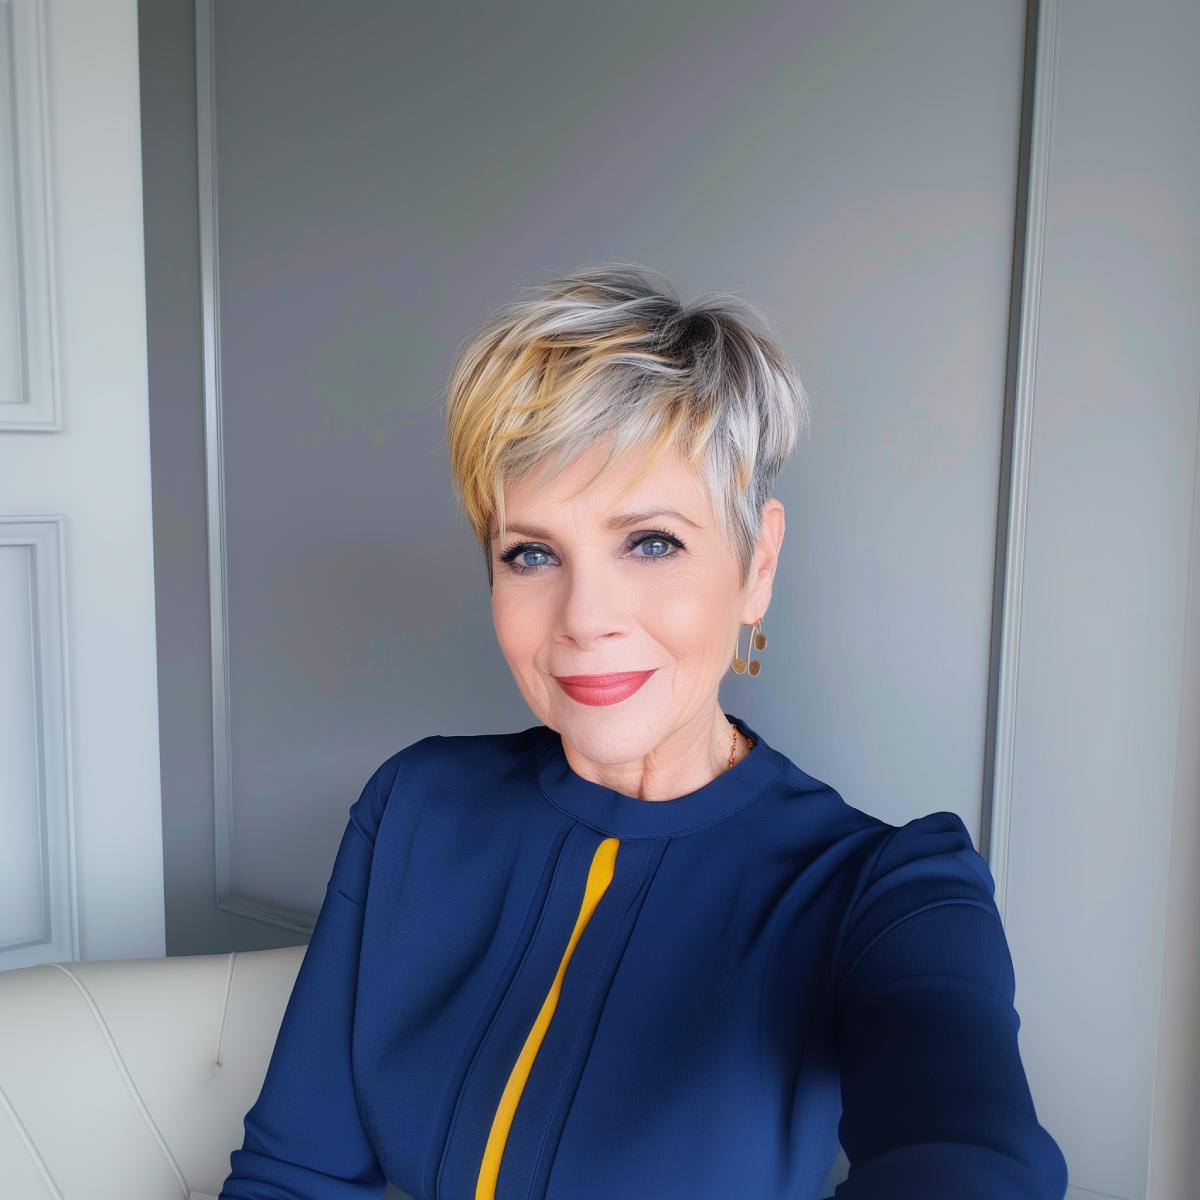 A woman with a pixie cut with side bangs and dark roots with blonde highlights.